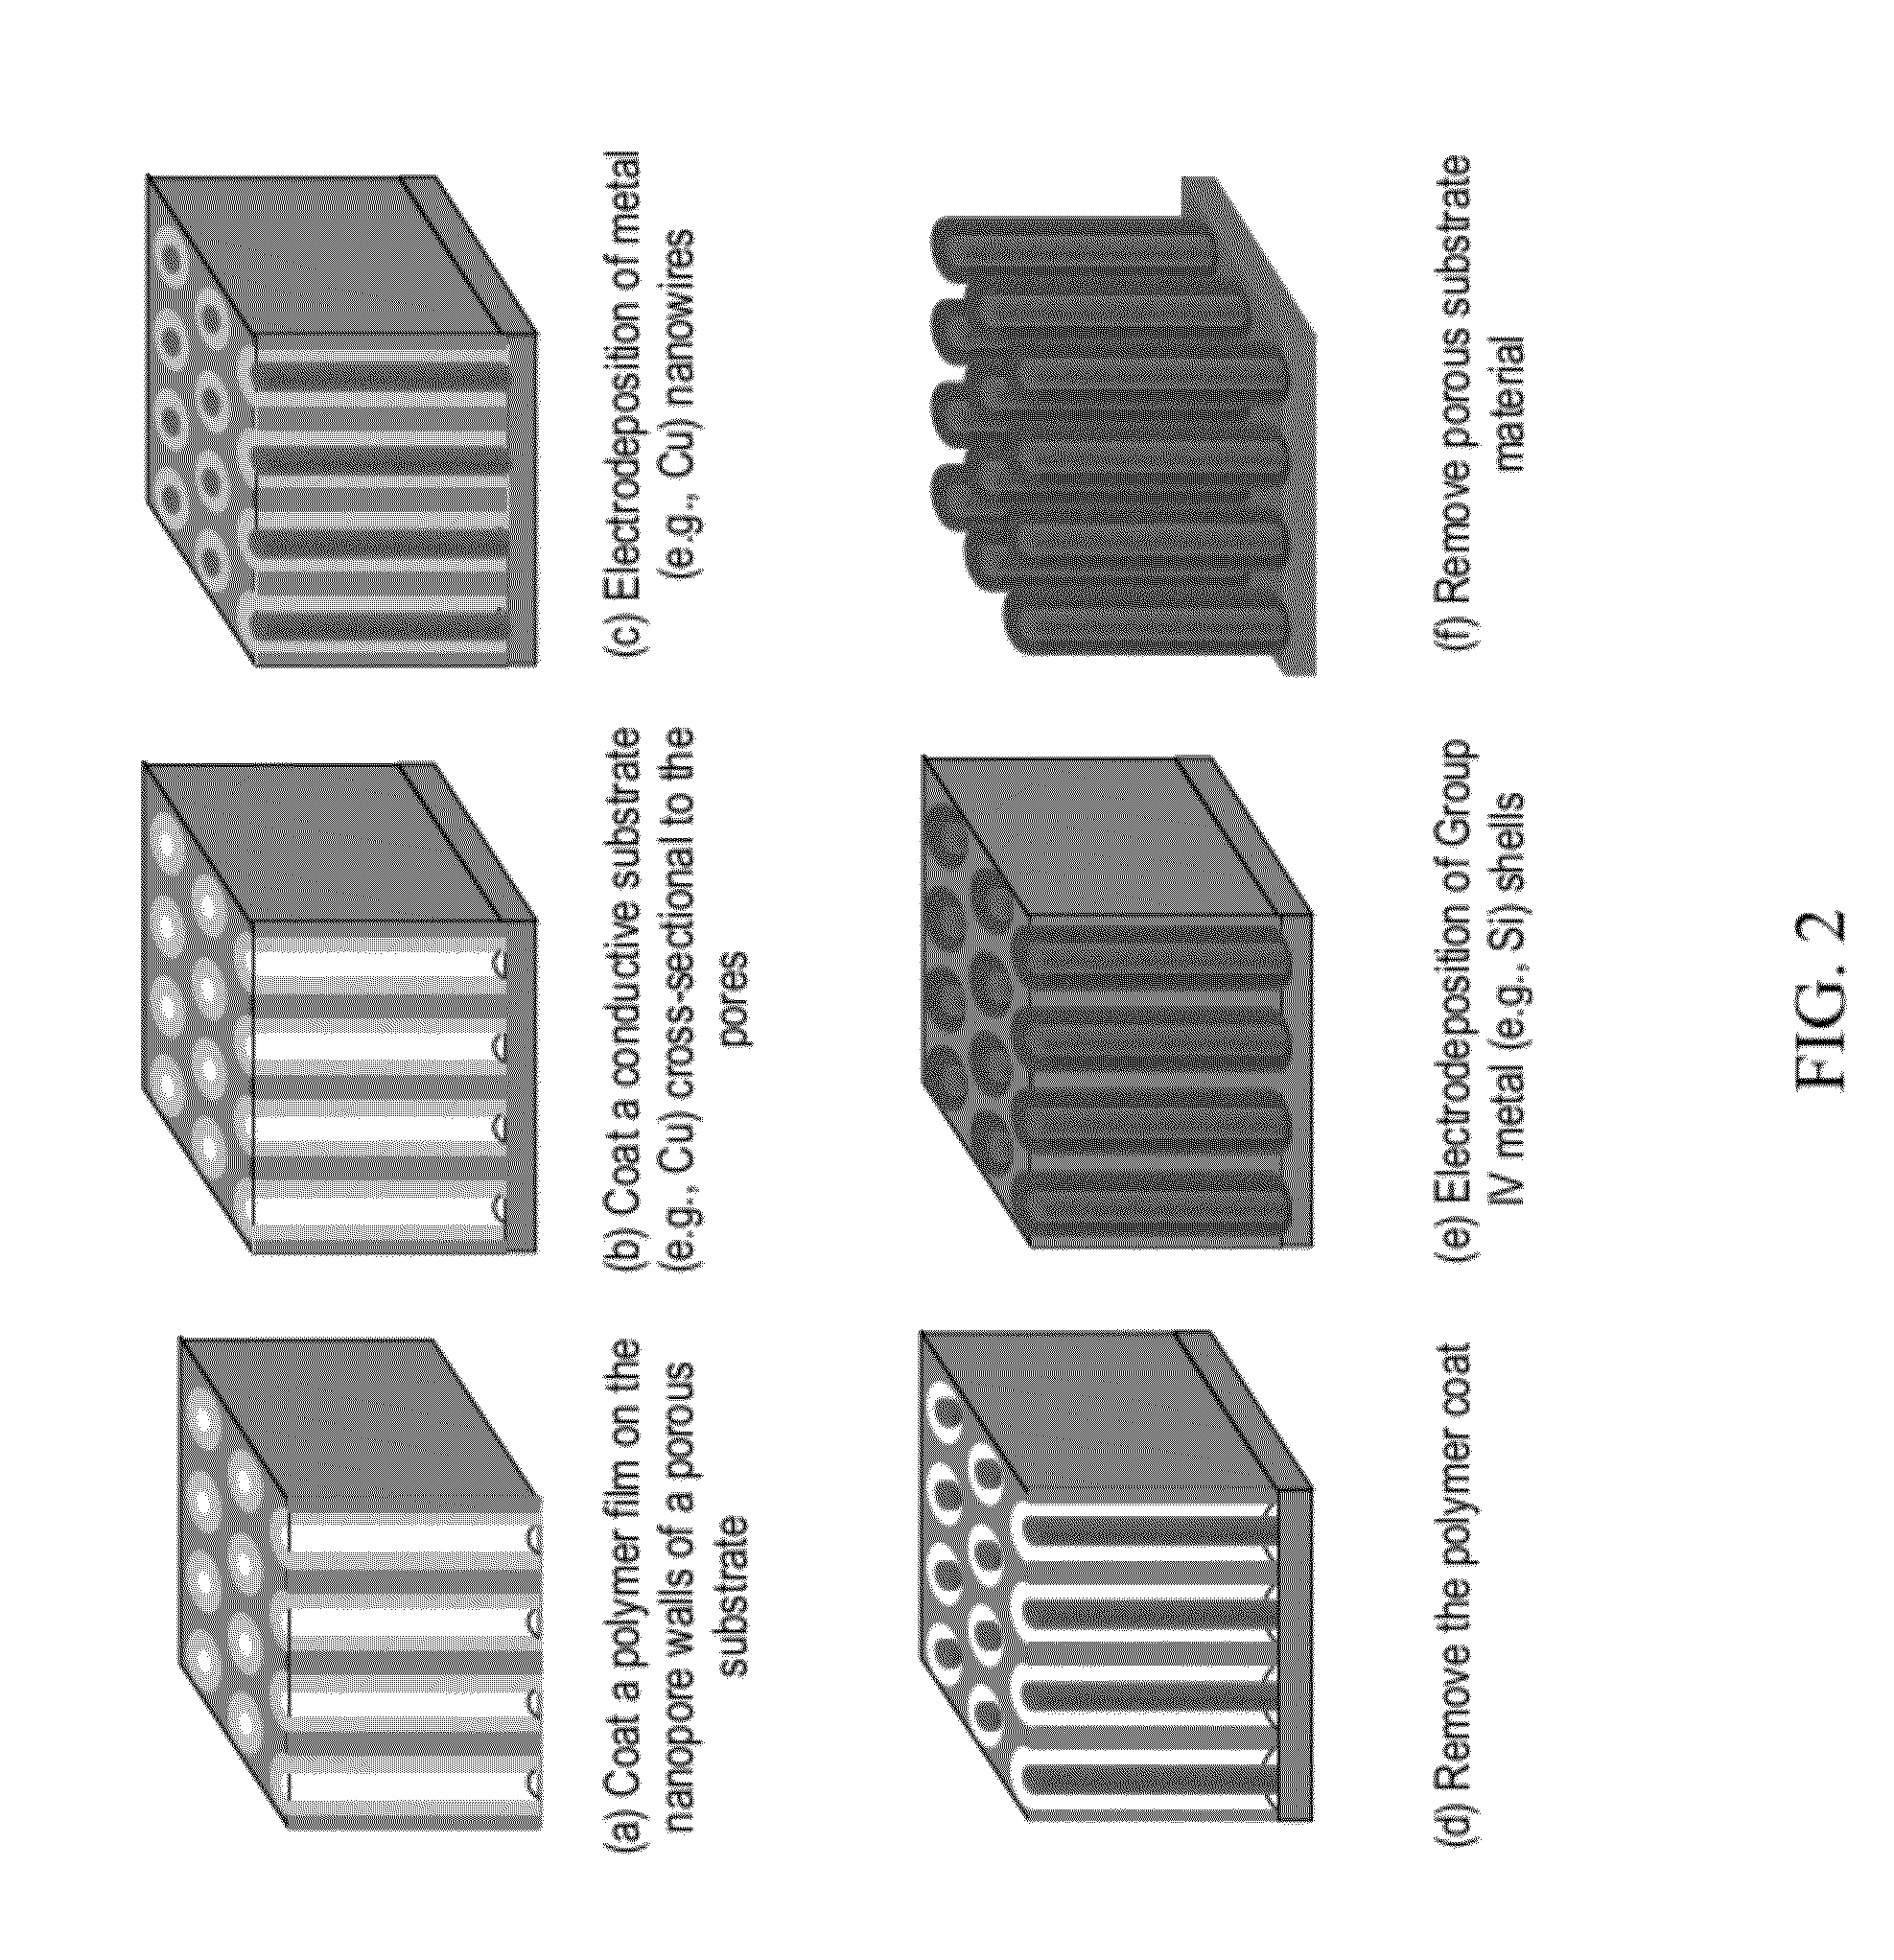 Composite nanowire compositions and methods of synthesis